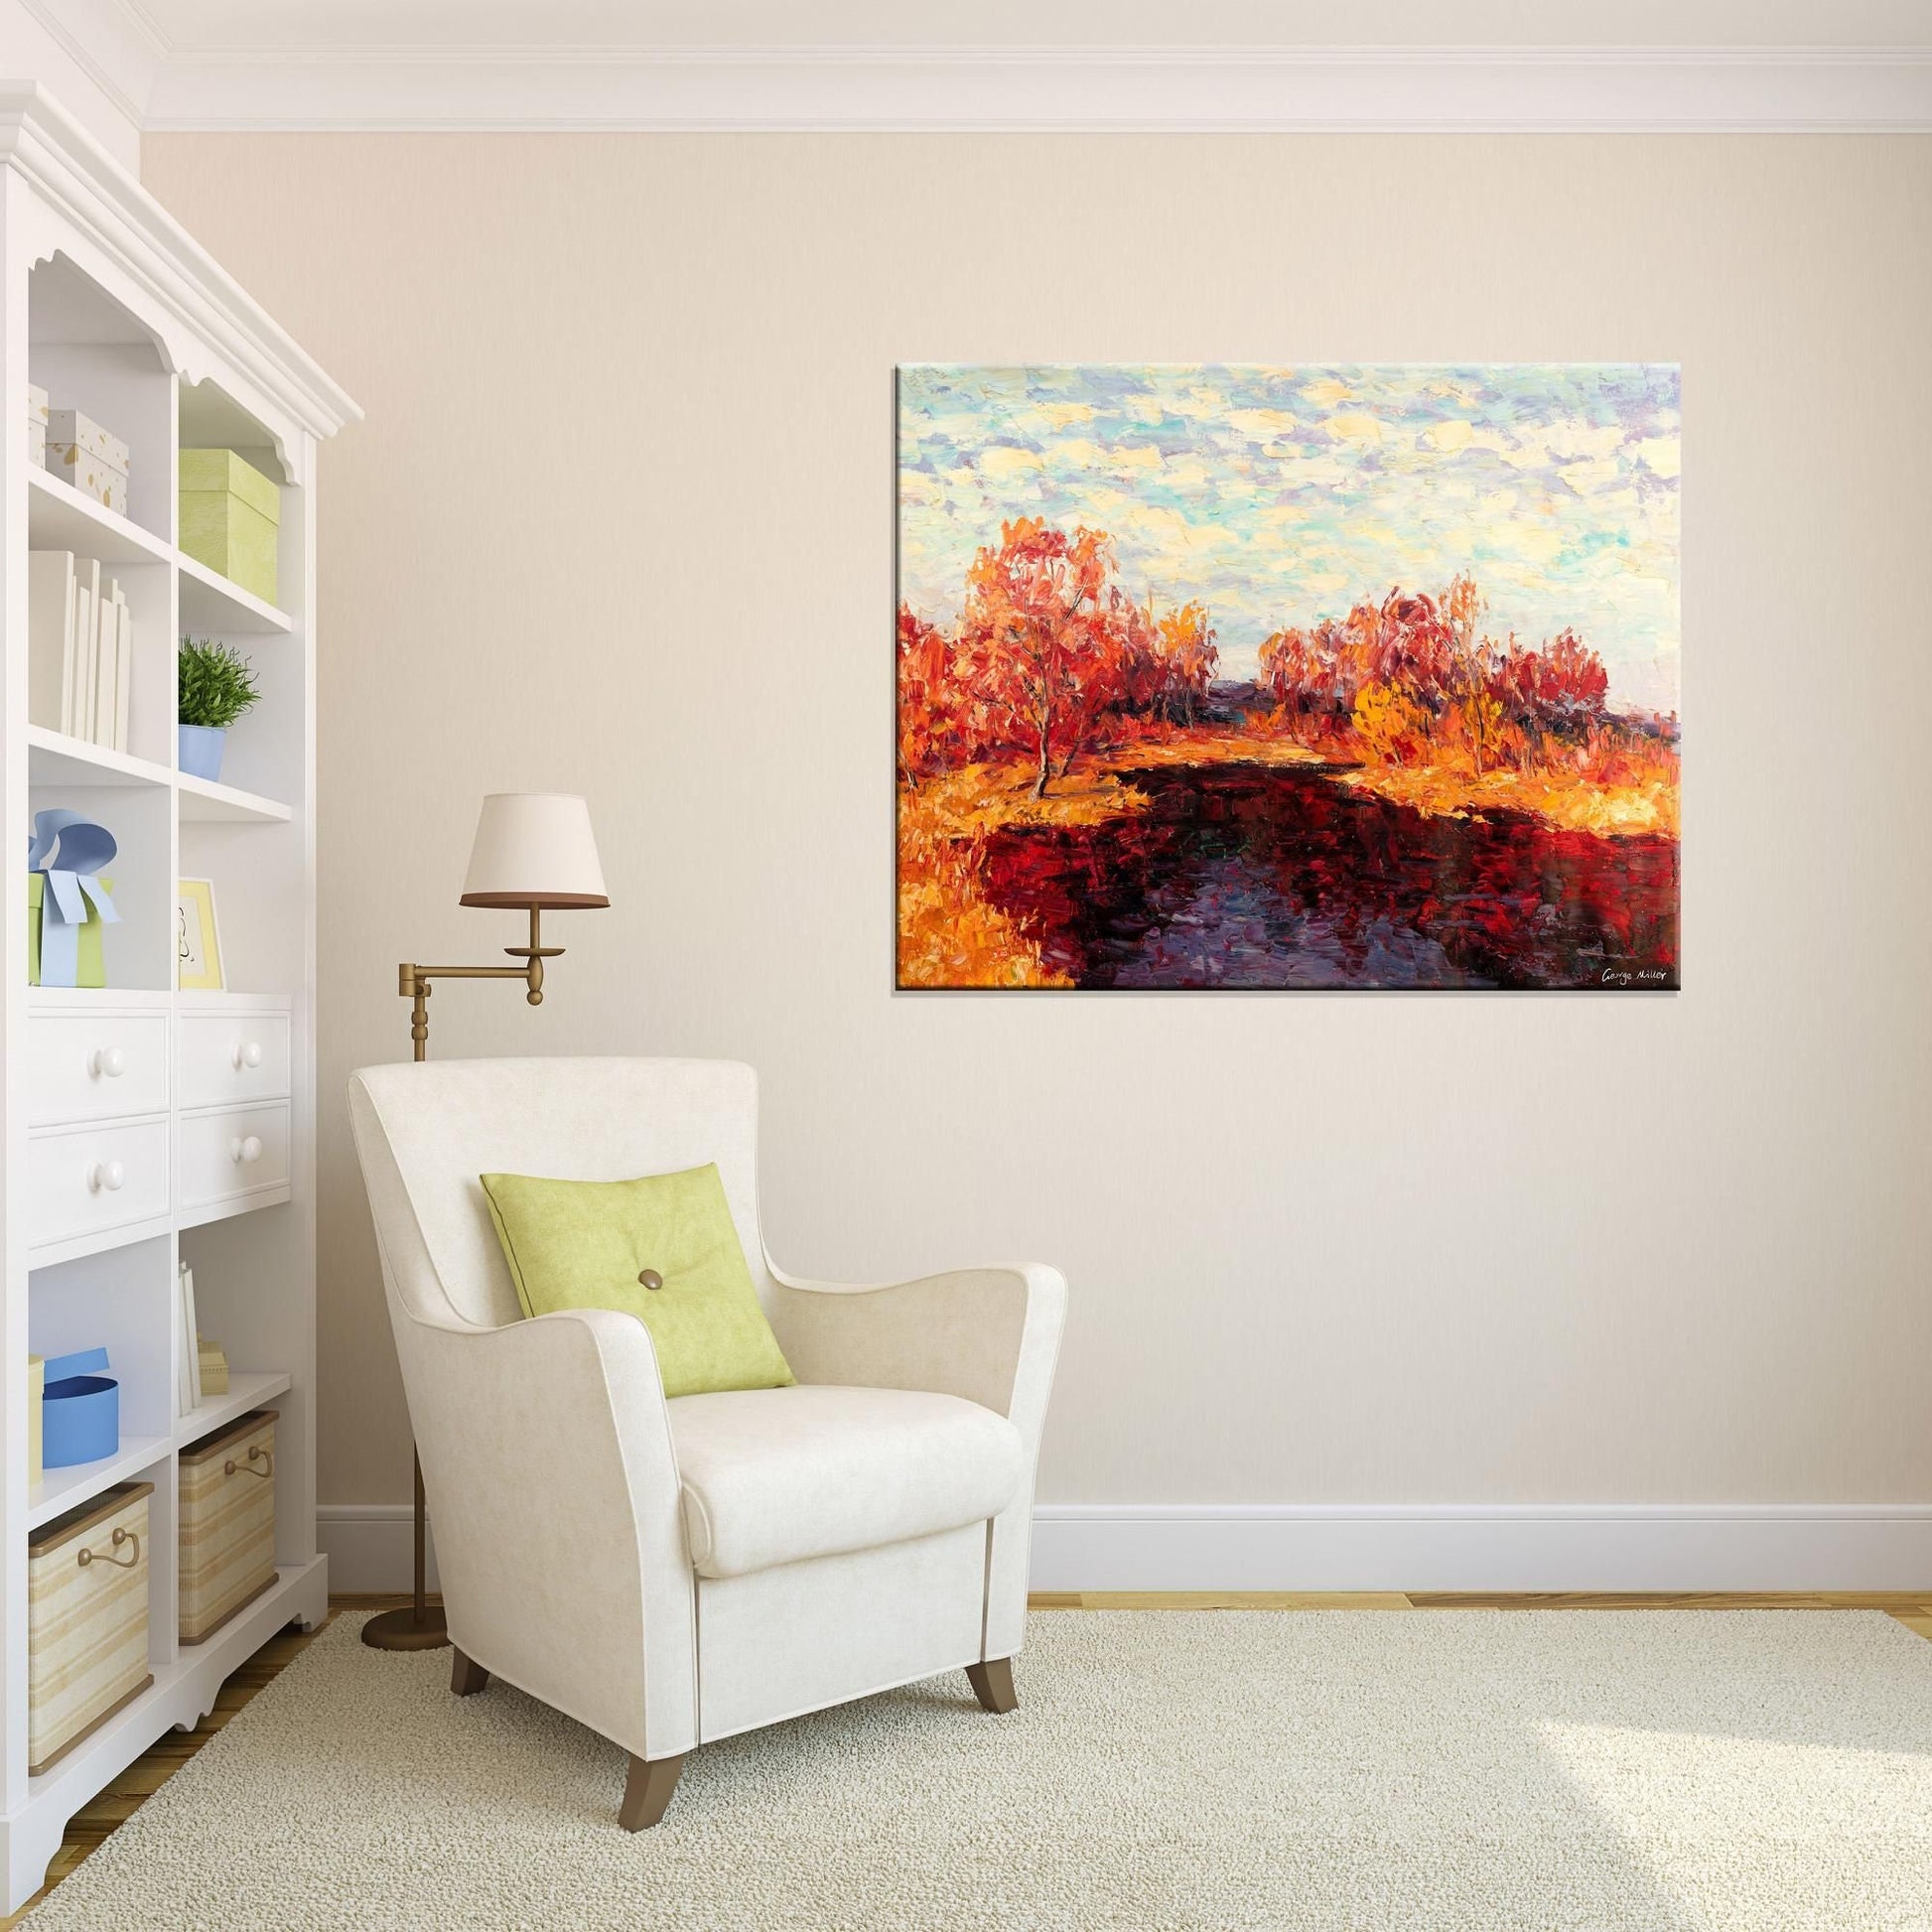 Oil Painting Autumn Wood, Wall Art, Oil On Canvas Painting, Landscape Wall Art, Oversized Wall Art, Handmade, Contemporary Artwork